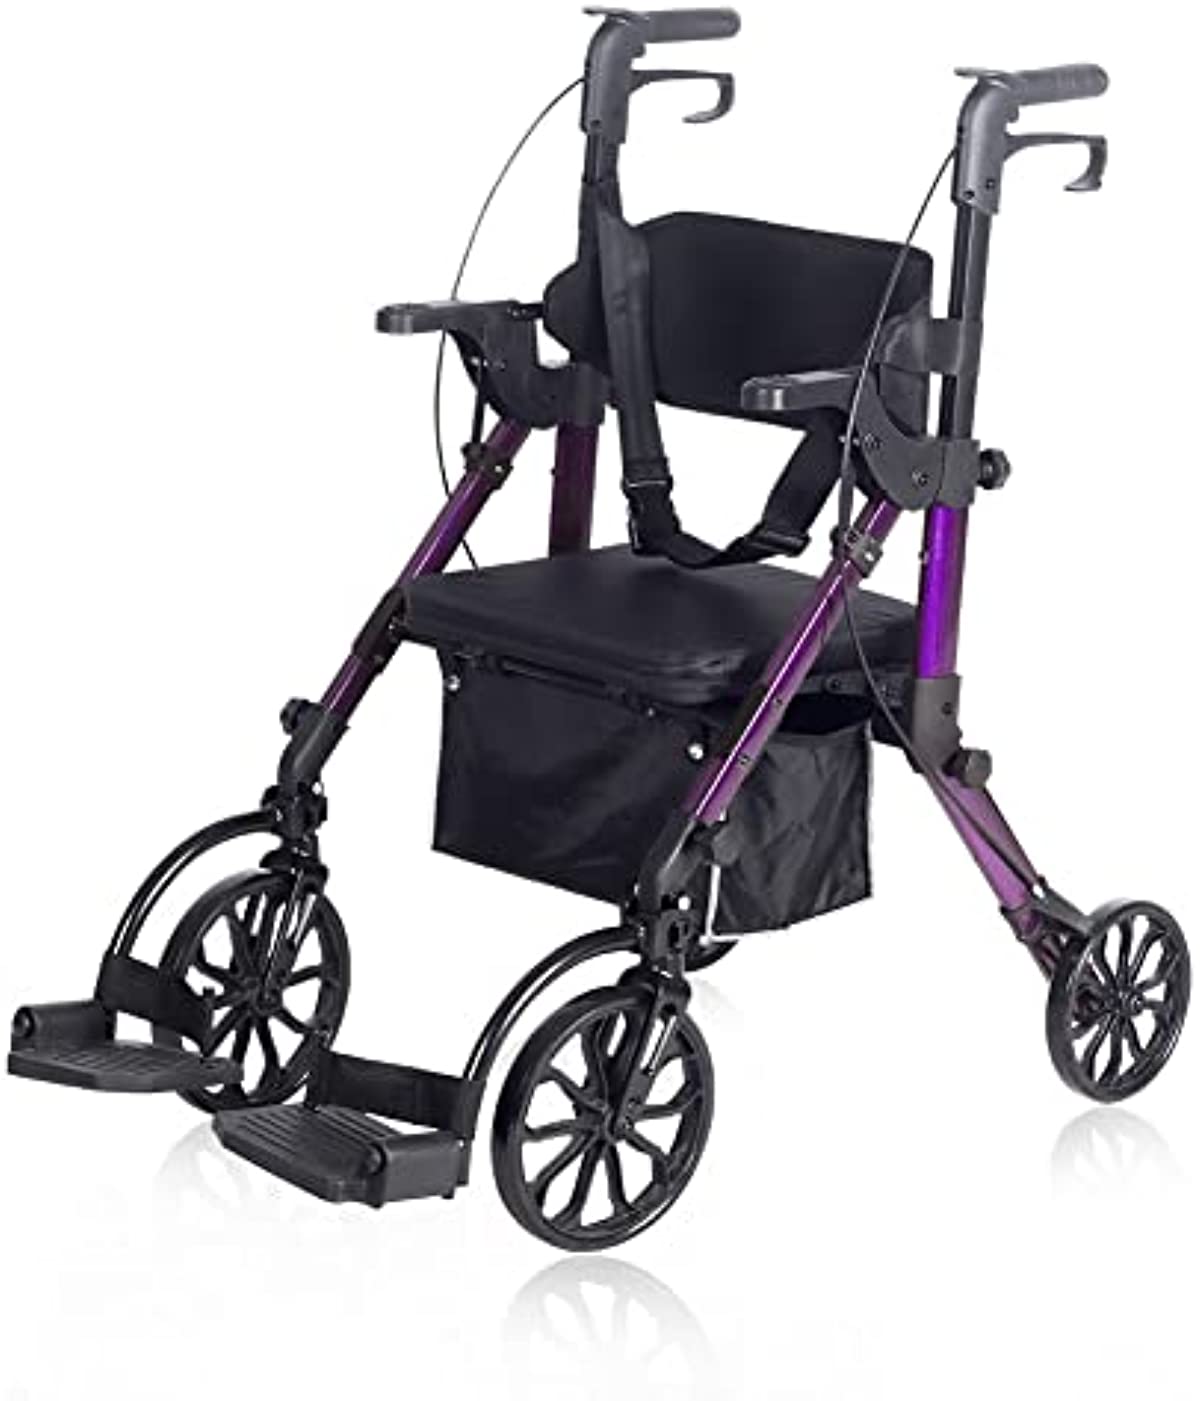 Elenker 2 in 1 Rollator Walker & Transport Chair, Folding Wheelchair Rolling Mobility Walking Aid with Seat Belt, Padded Seat and Detachable Footrests for Adult, Seniors (Purple)